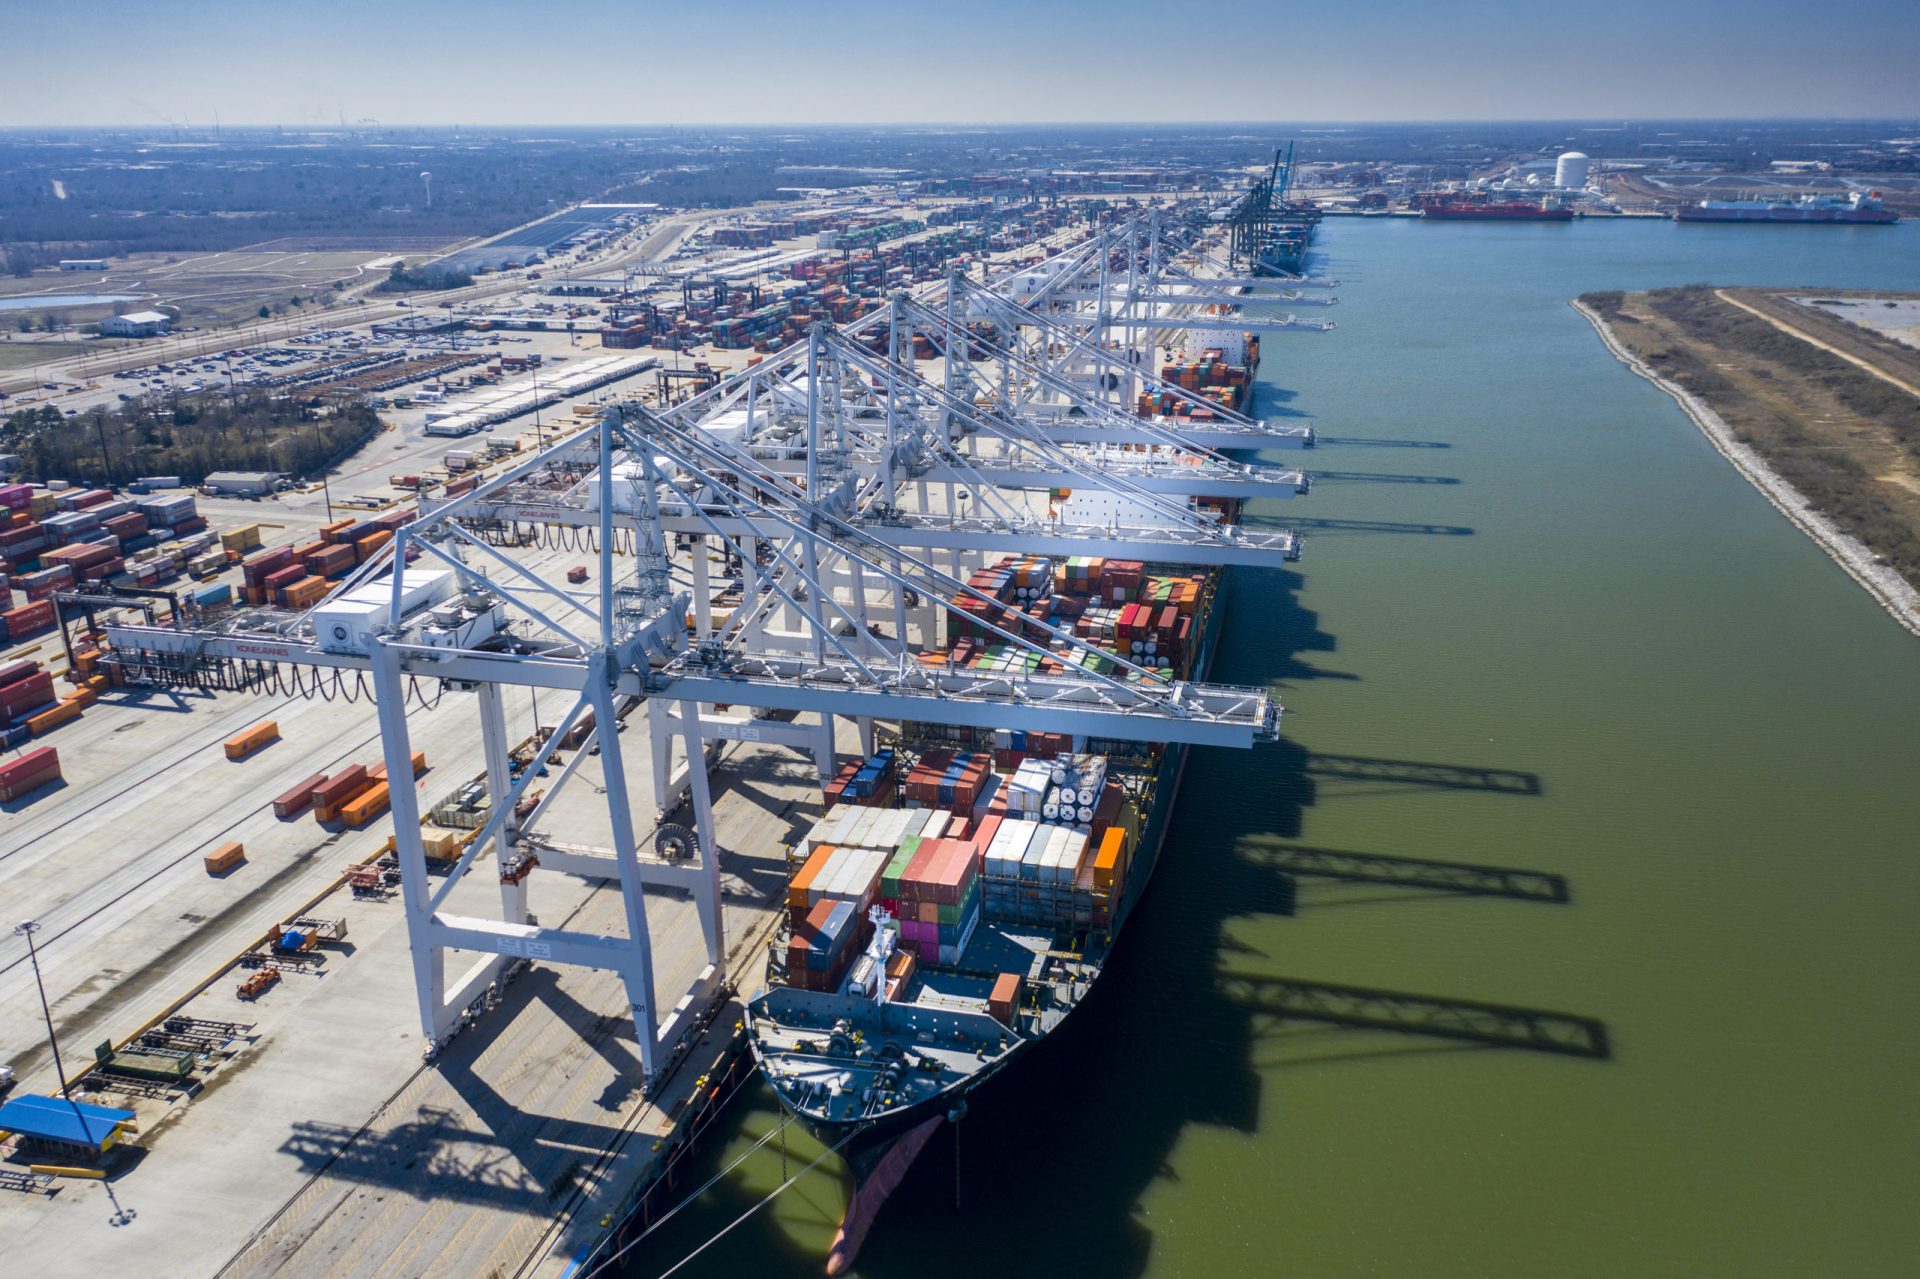 Aerial view of a busy shipping port of Houston with cargo ships, cranes, and containers.